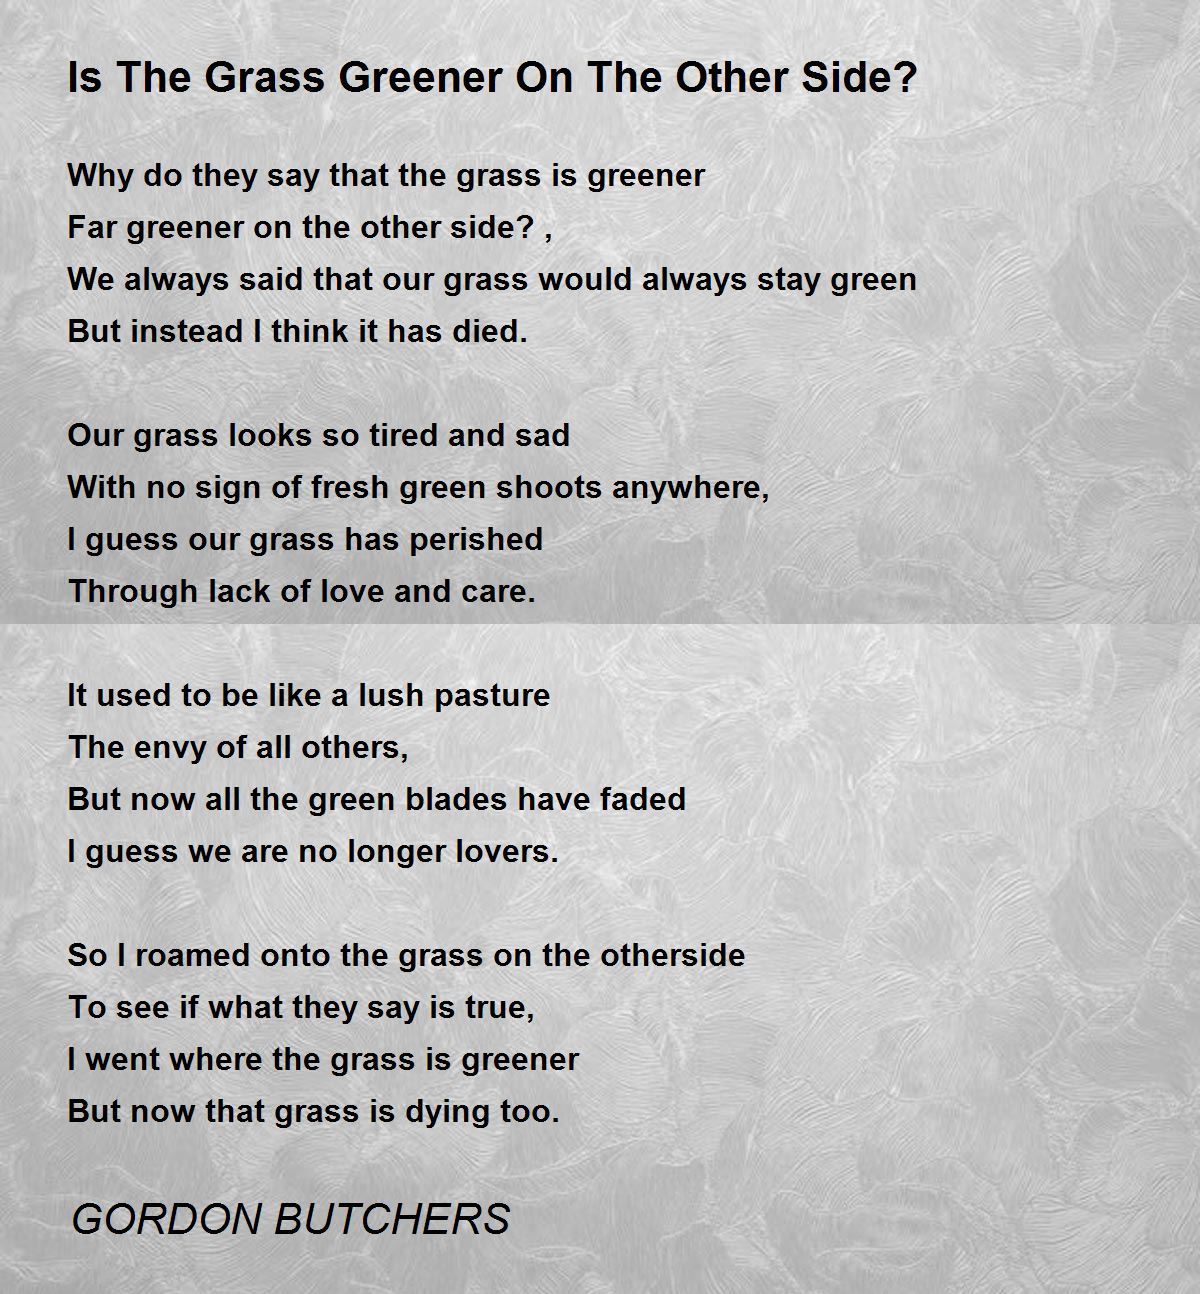 Is The Grass Greener On The Other Side? - Is The Grass Greener On